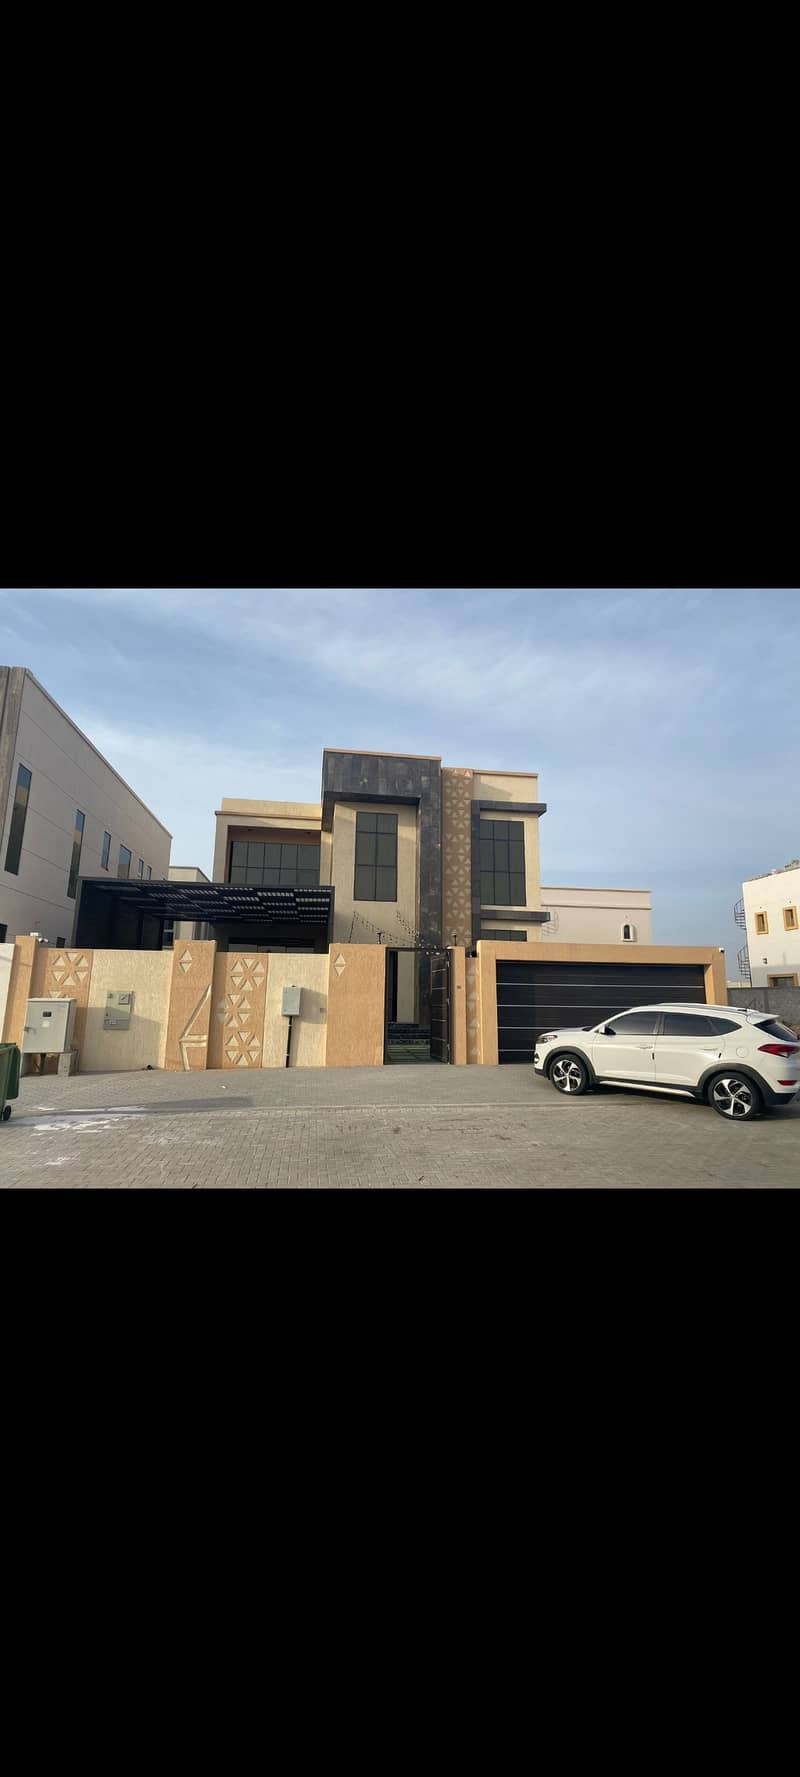 An opportunity for sale in the Emirate of Ajman  Villa with annex + covered swimming pool   An area very close to Sheikh Mohammed bin Zayed Road  Land